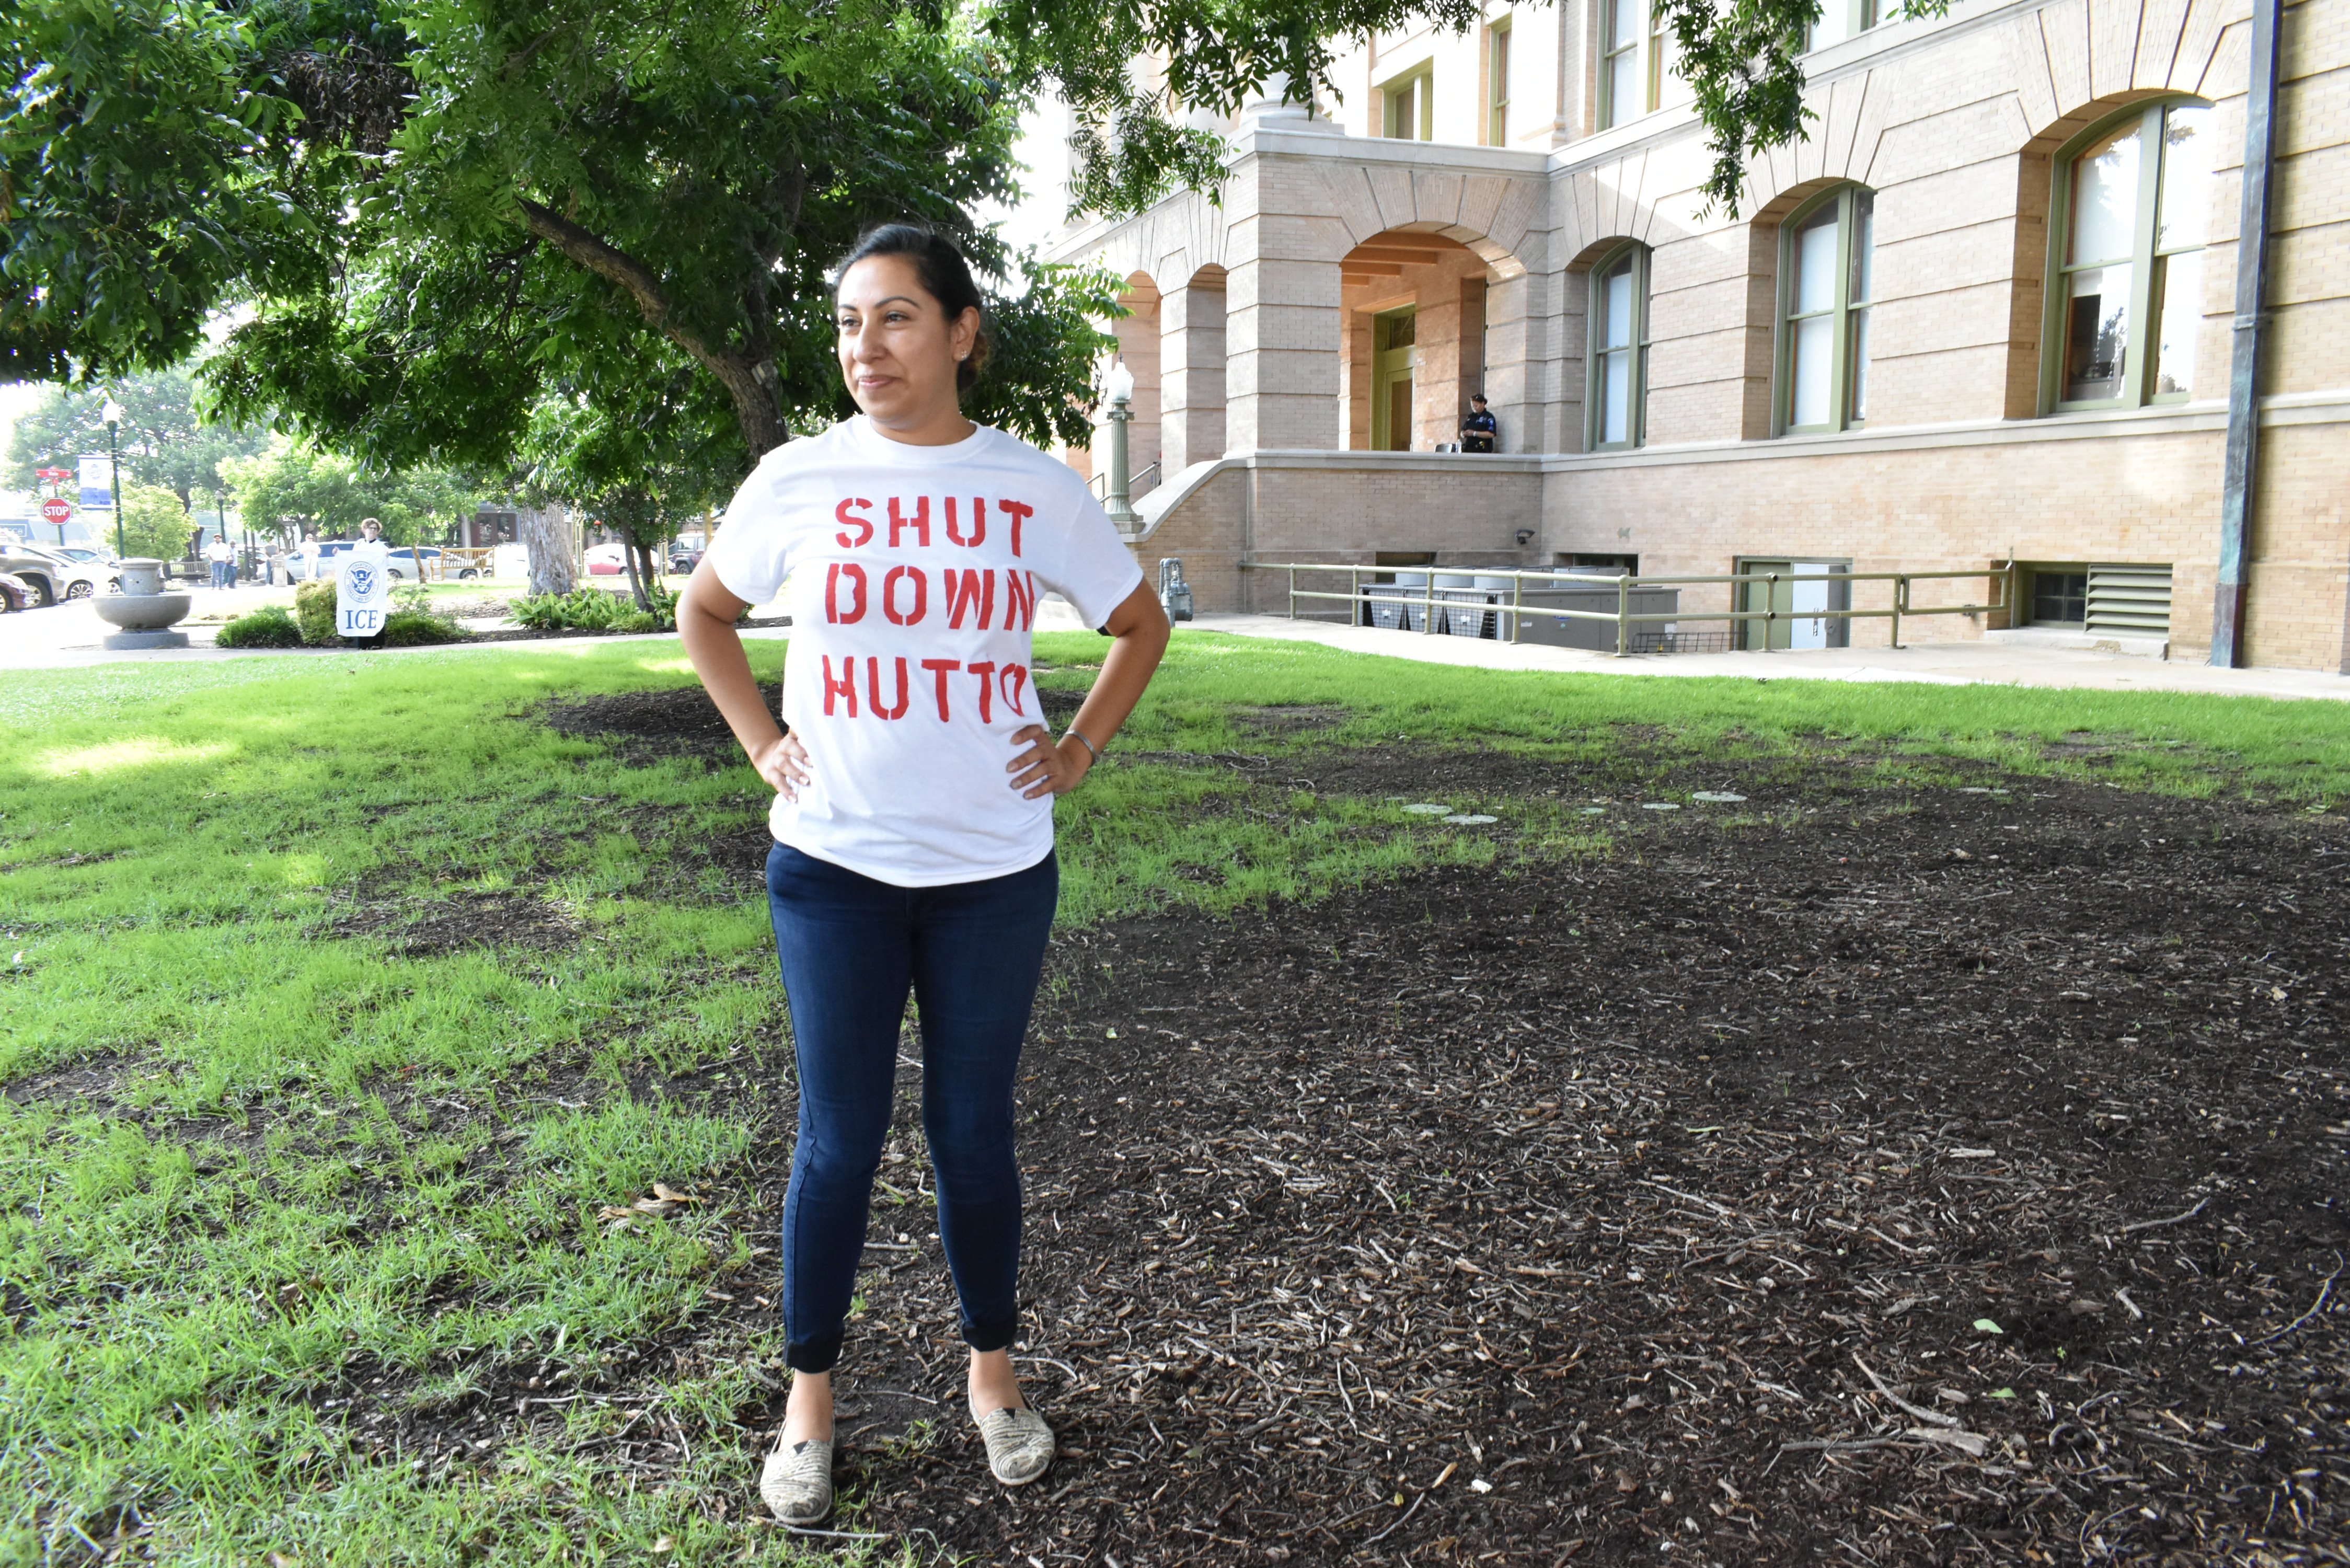 A woman wearing a t-shirt which says "Shut down Hutto"